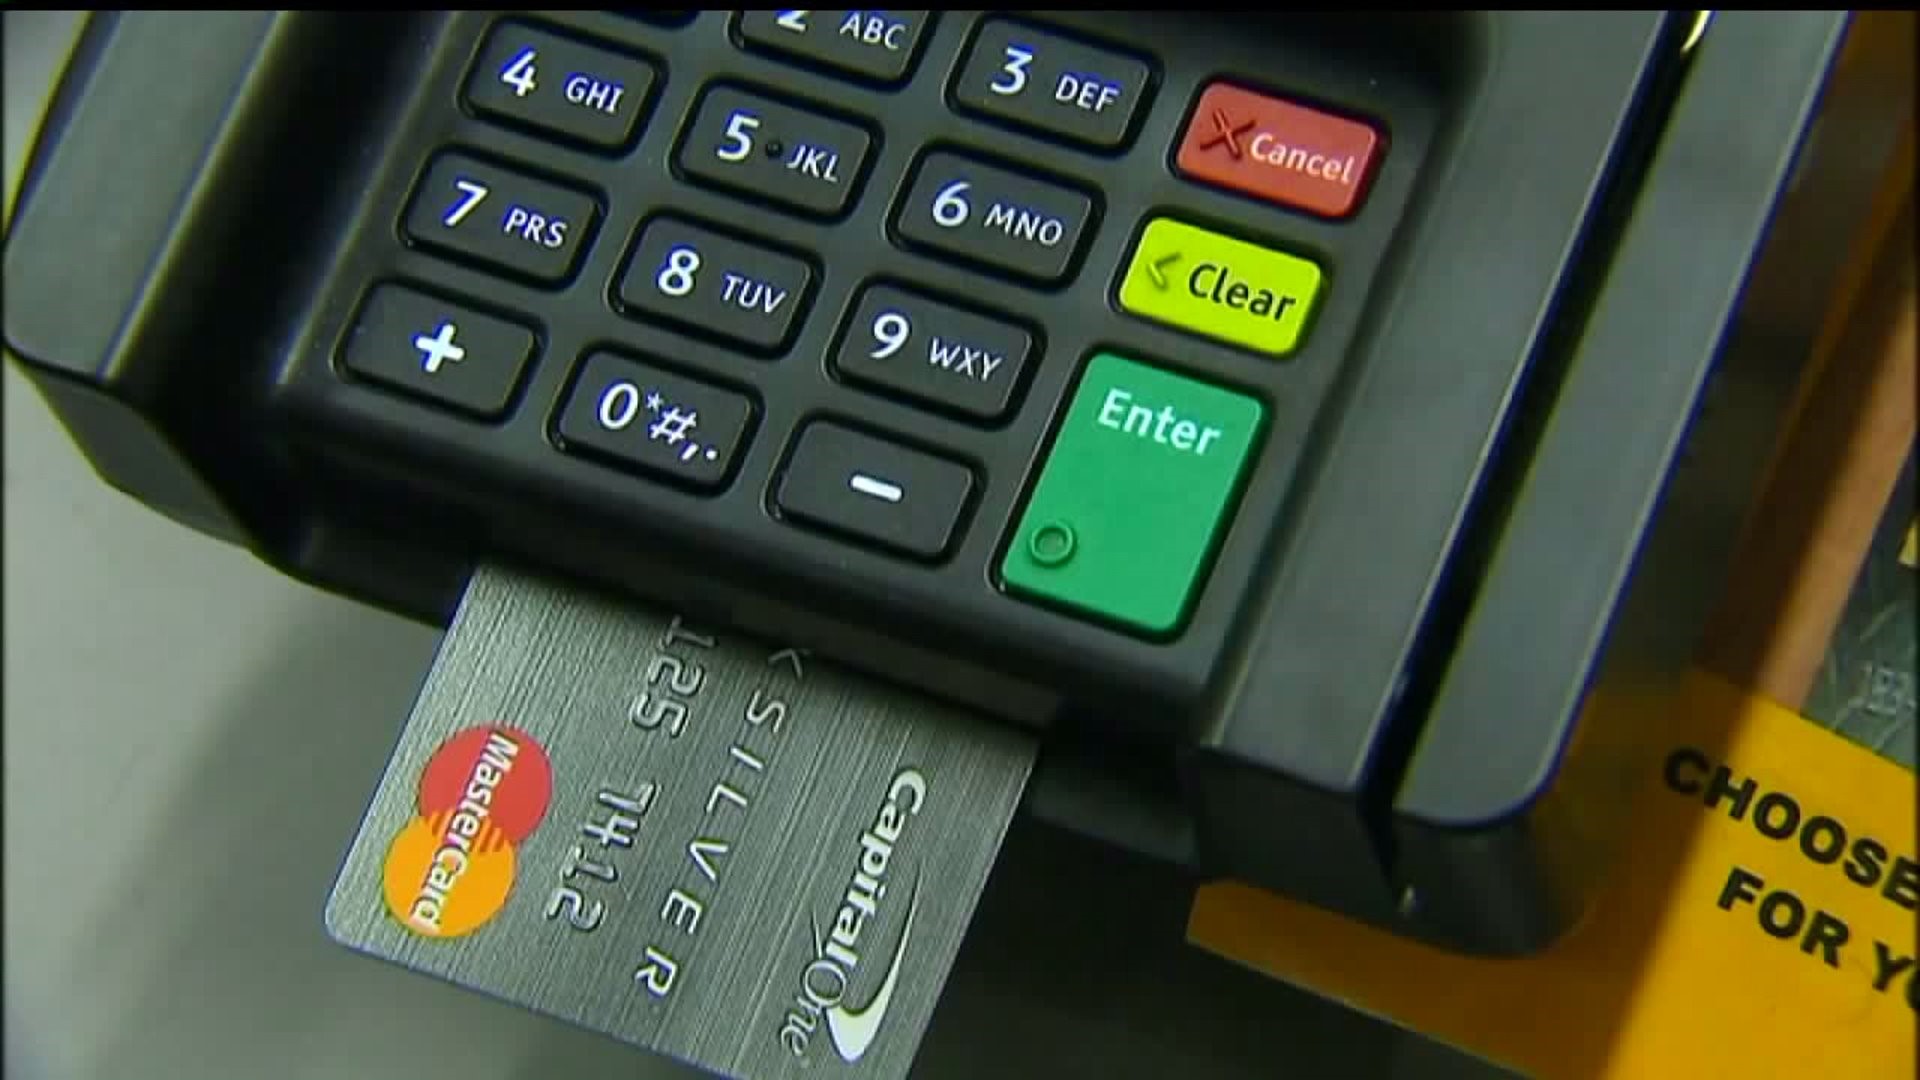 Cumberland County launches initiative to address card skimming